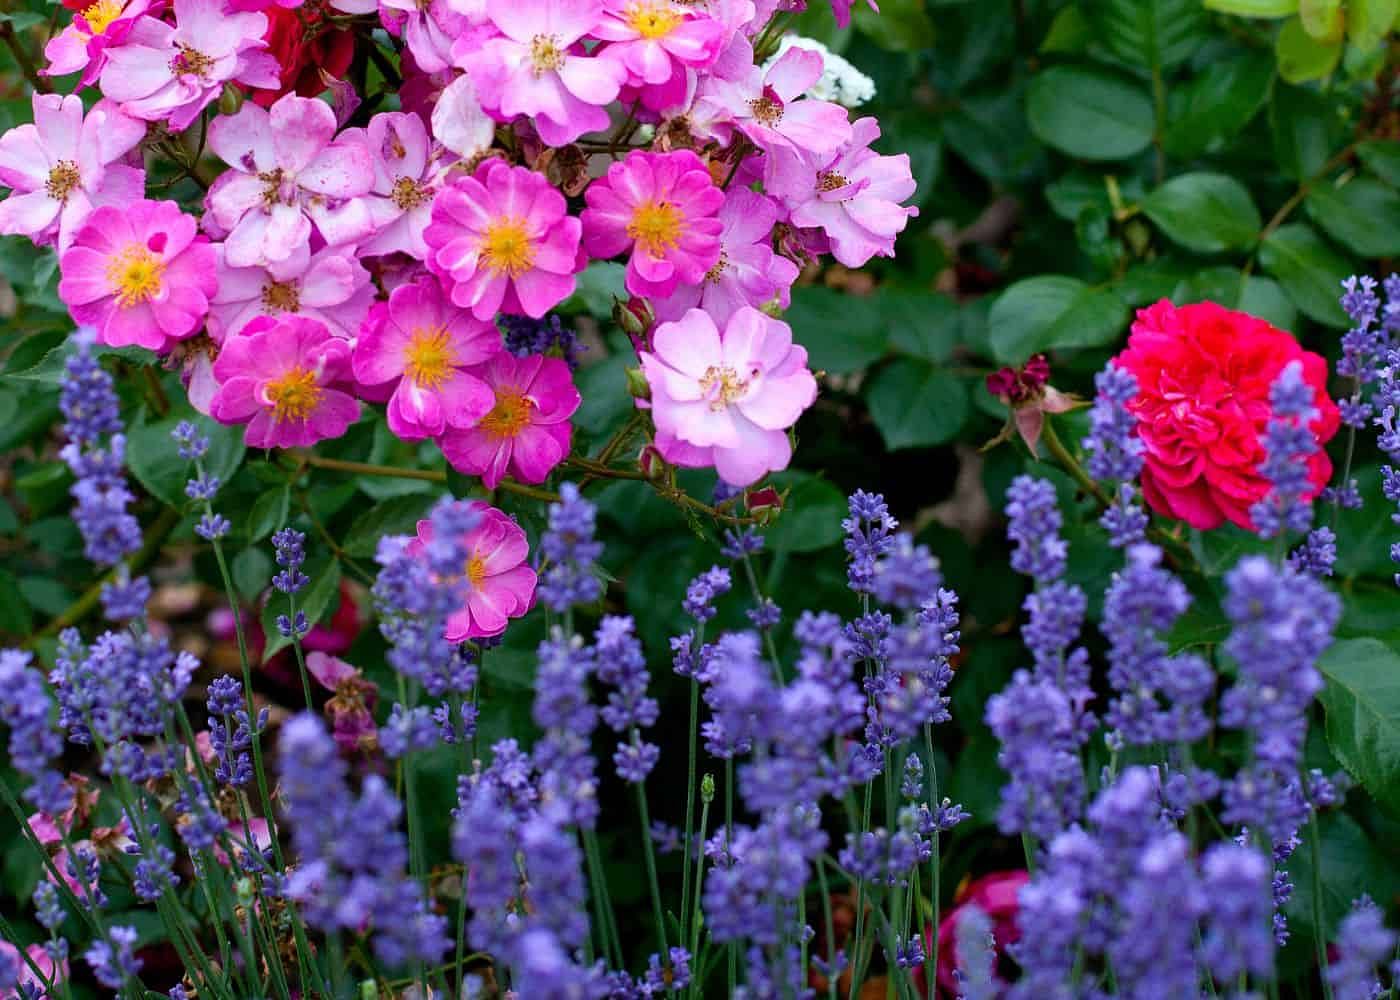 companion plants with lavender including rosemary, thyme, sage, and marigolds in a garden